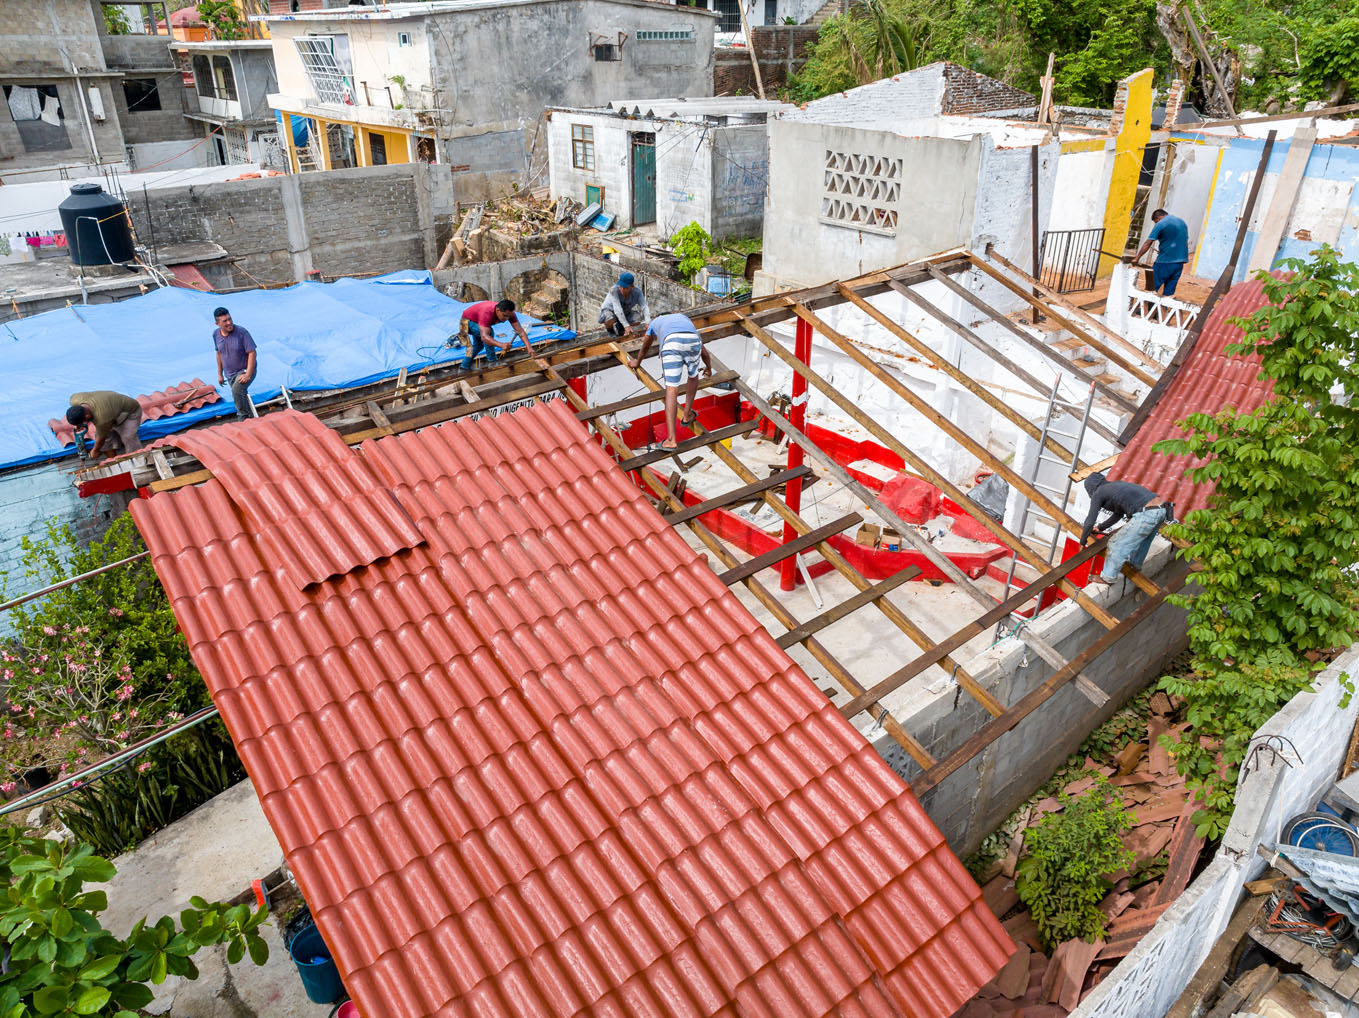 We're also providing suffering churches with new heavy-duty roofs to replace those destroyed by the storm.